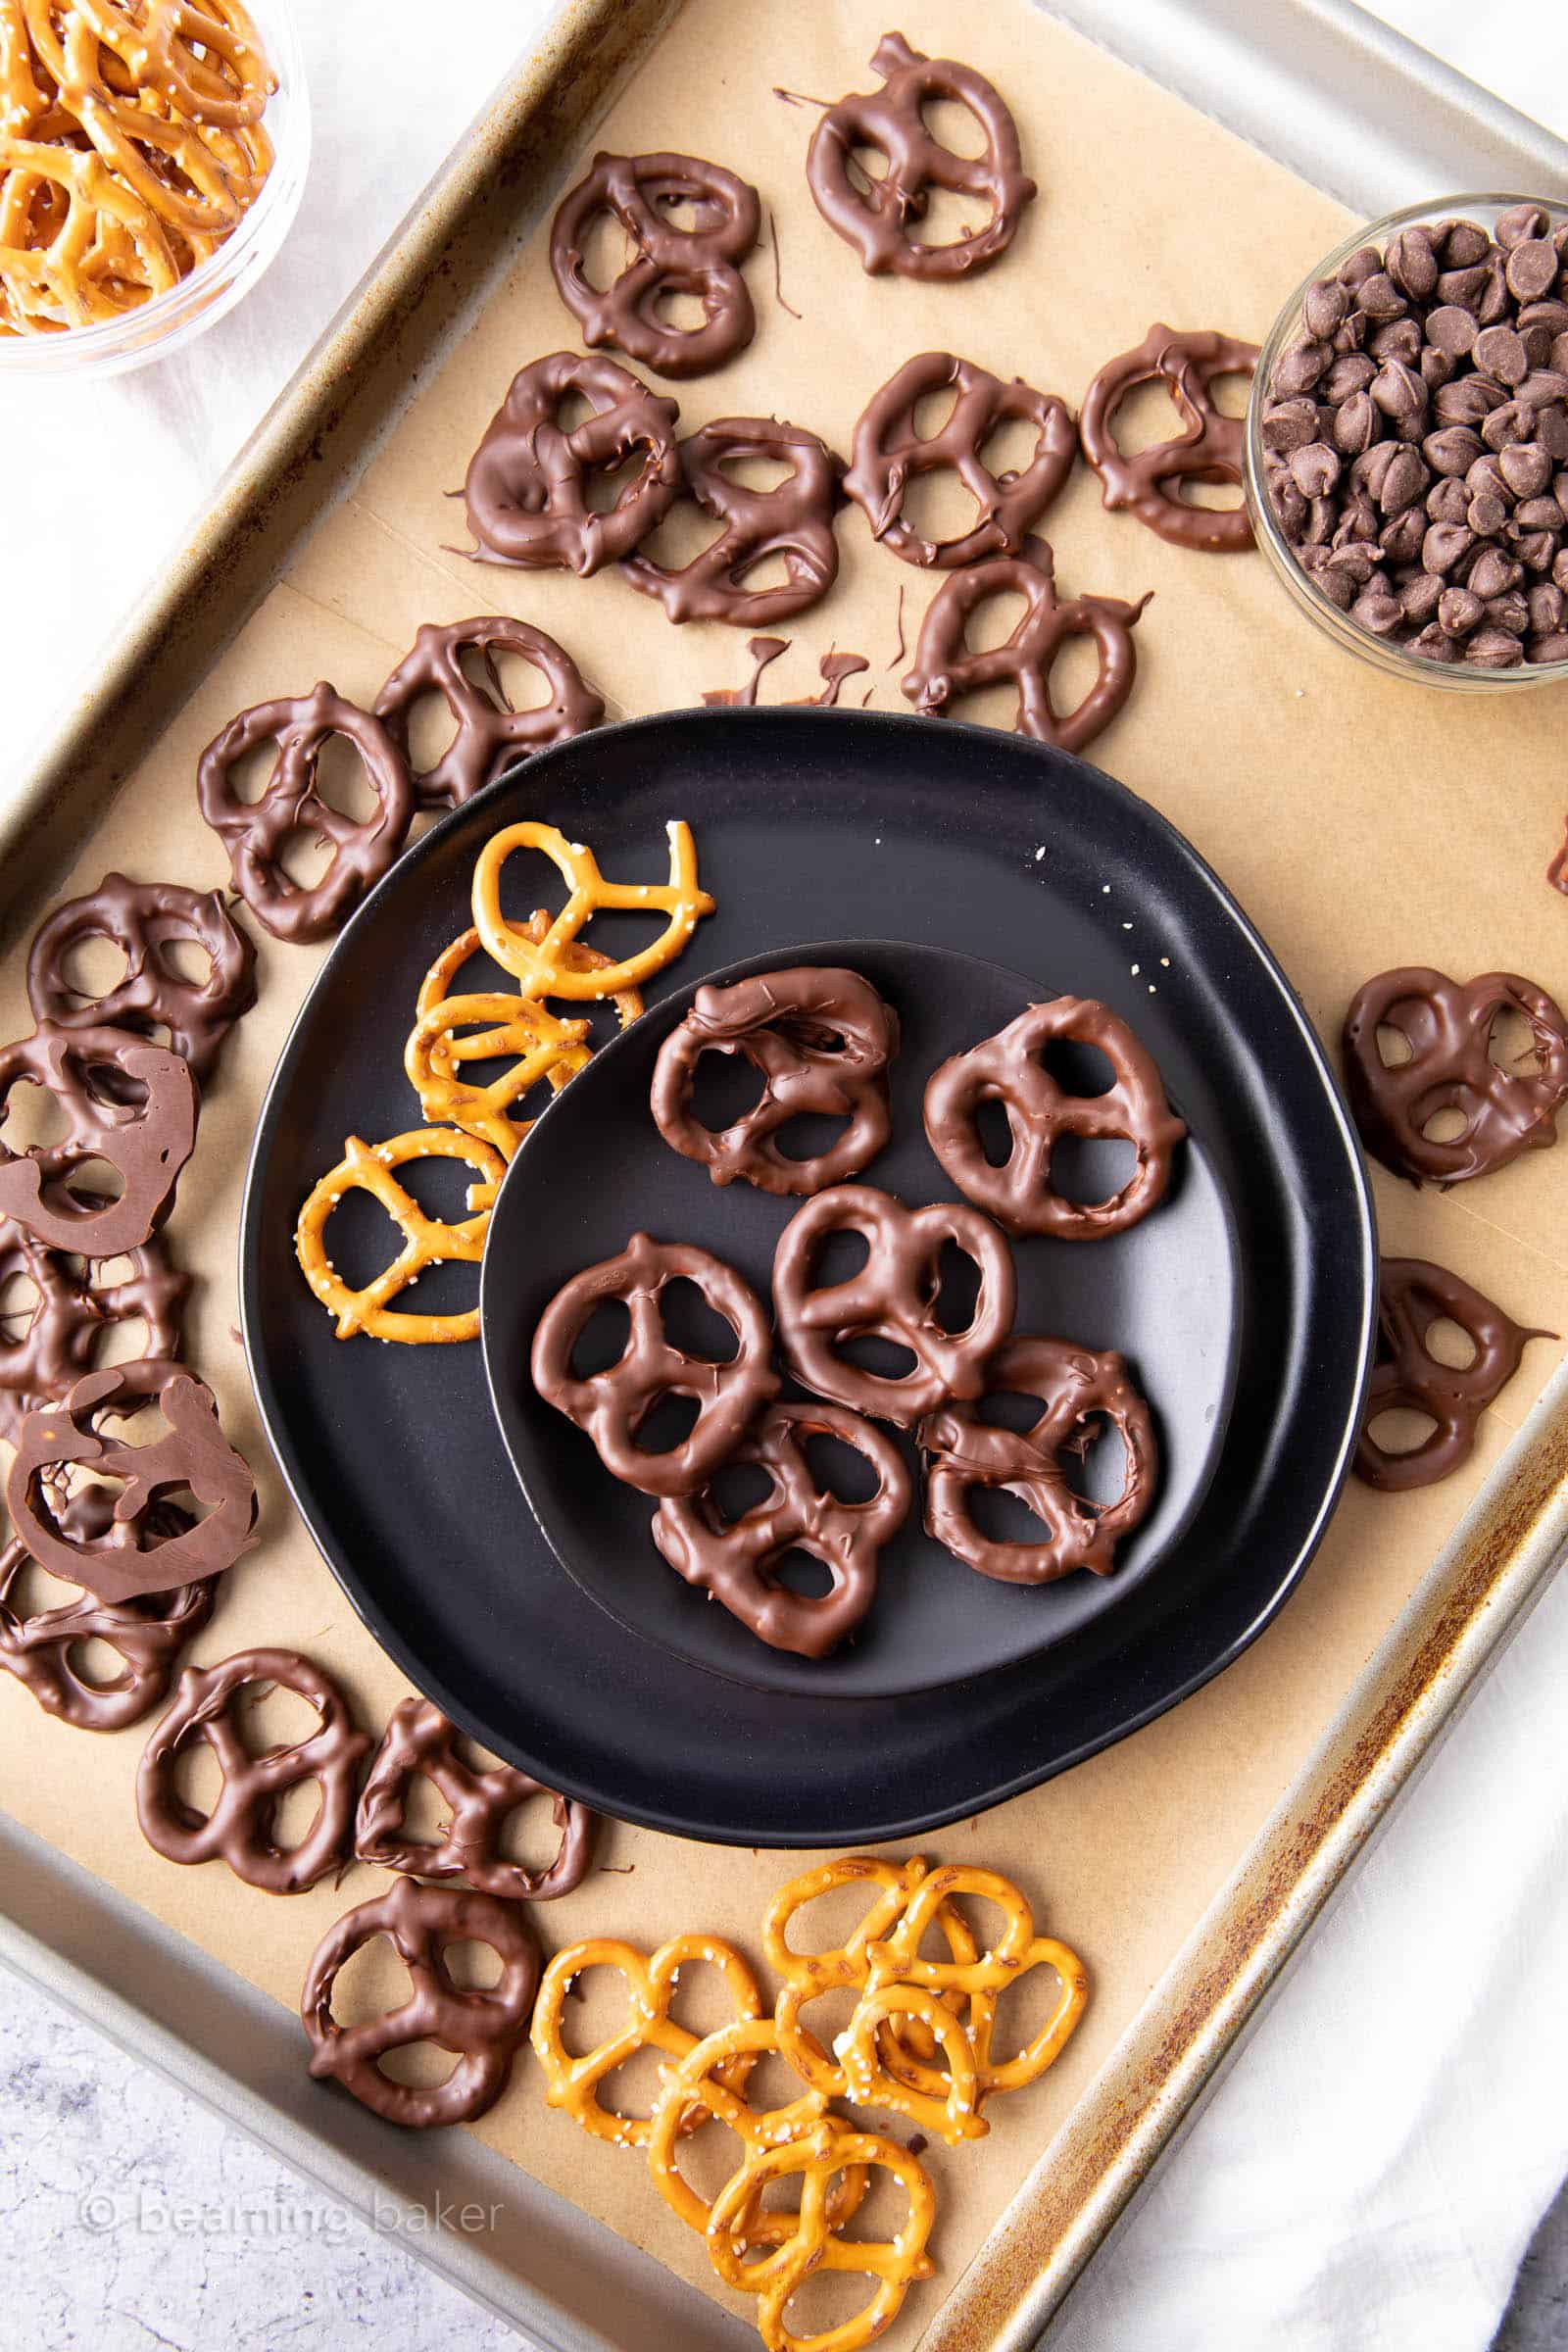 Plate of vegan chocolate covered pretzels on a sheet with more chocolate covered pretzels chocolate and regular pretzels